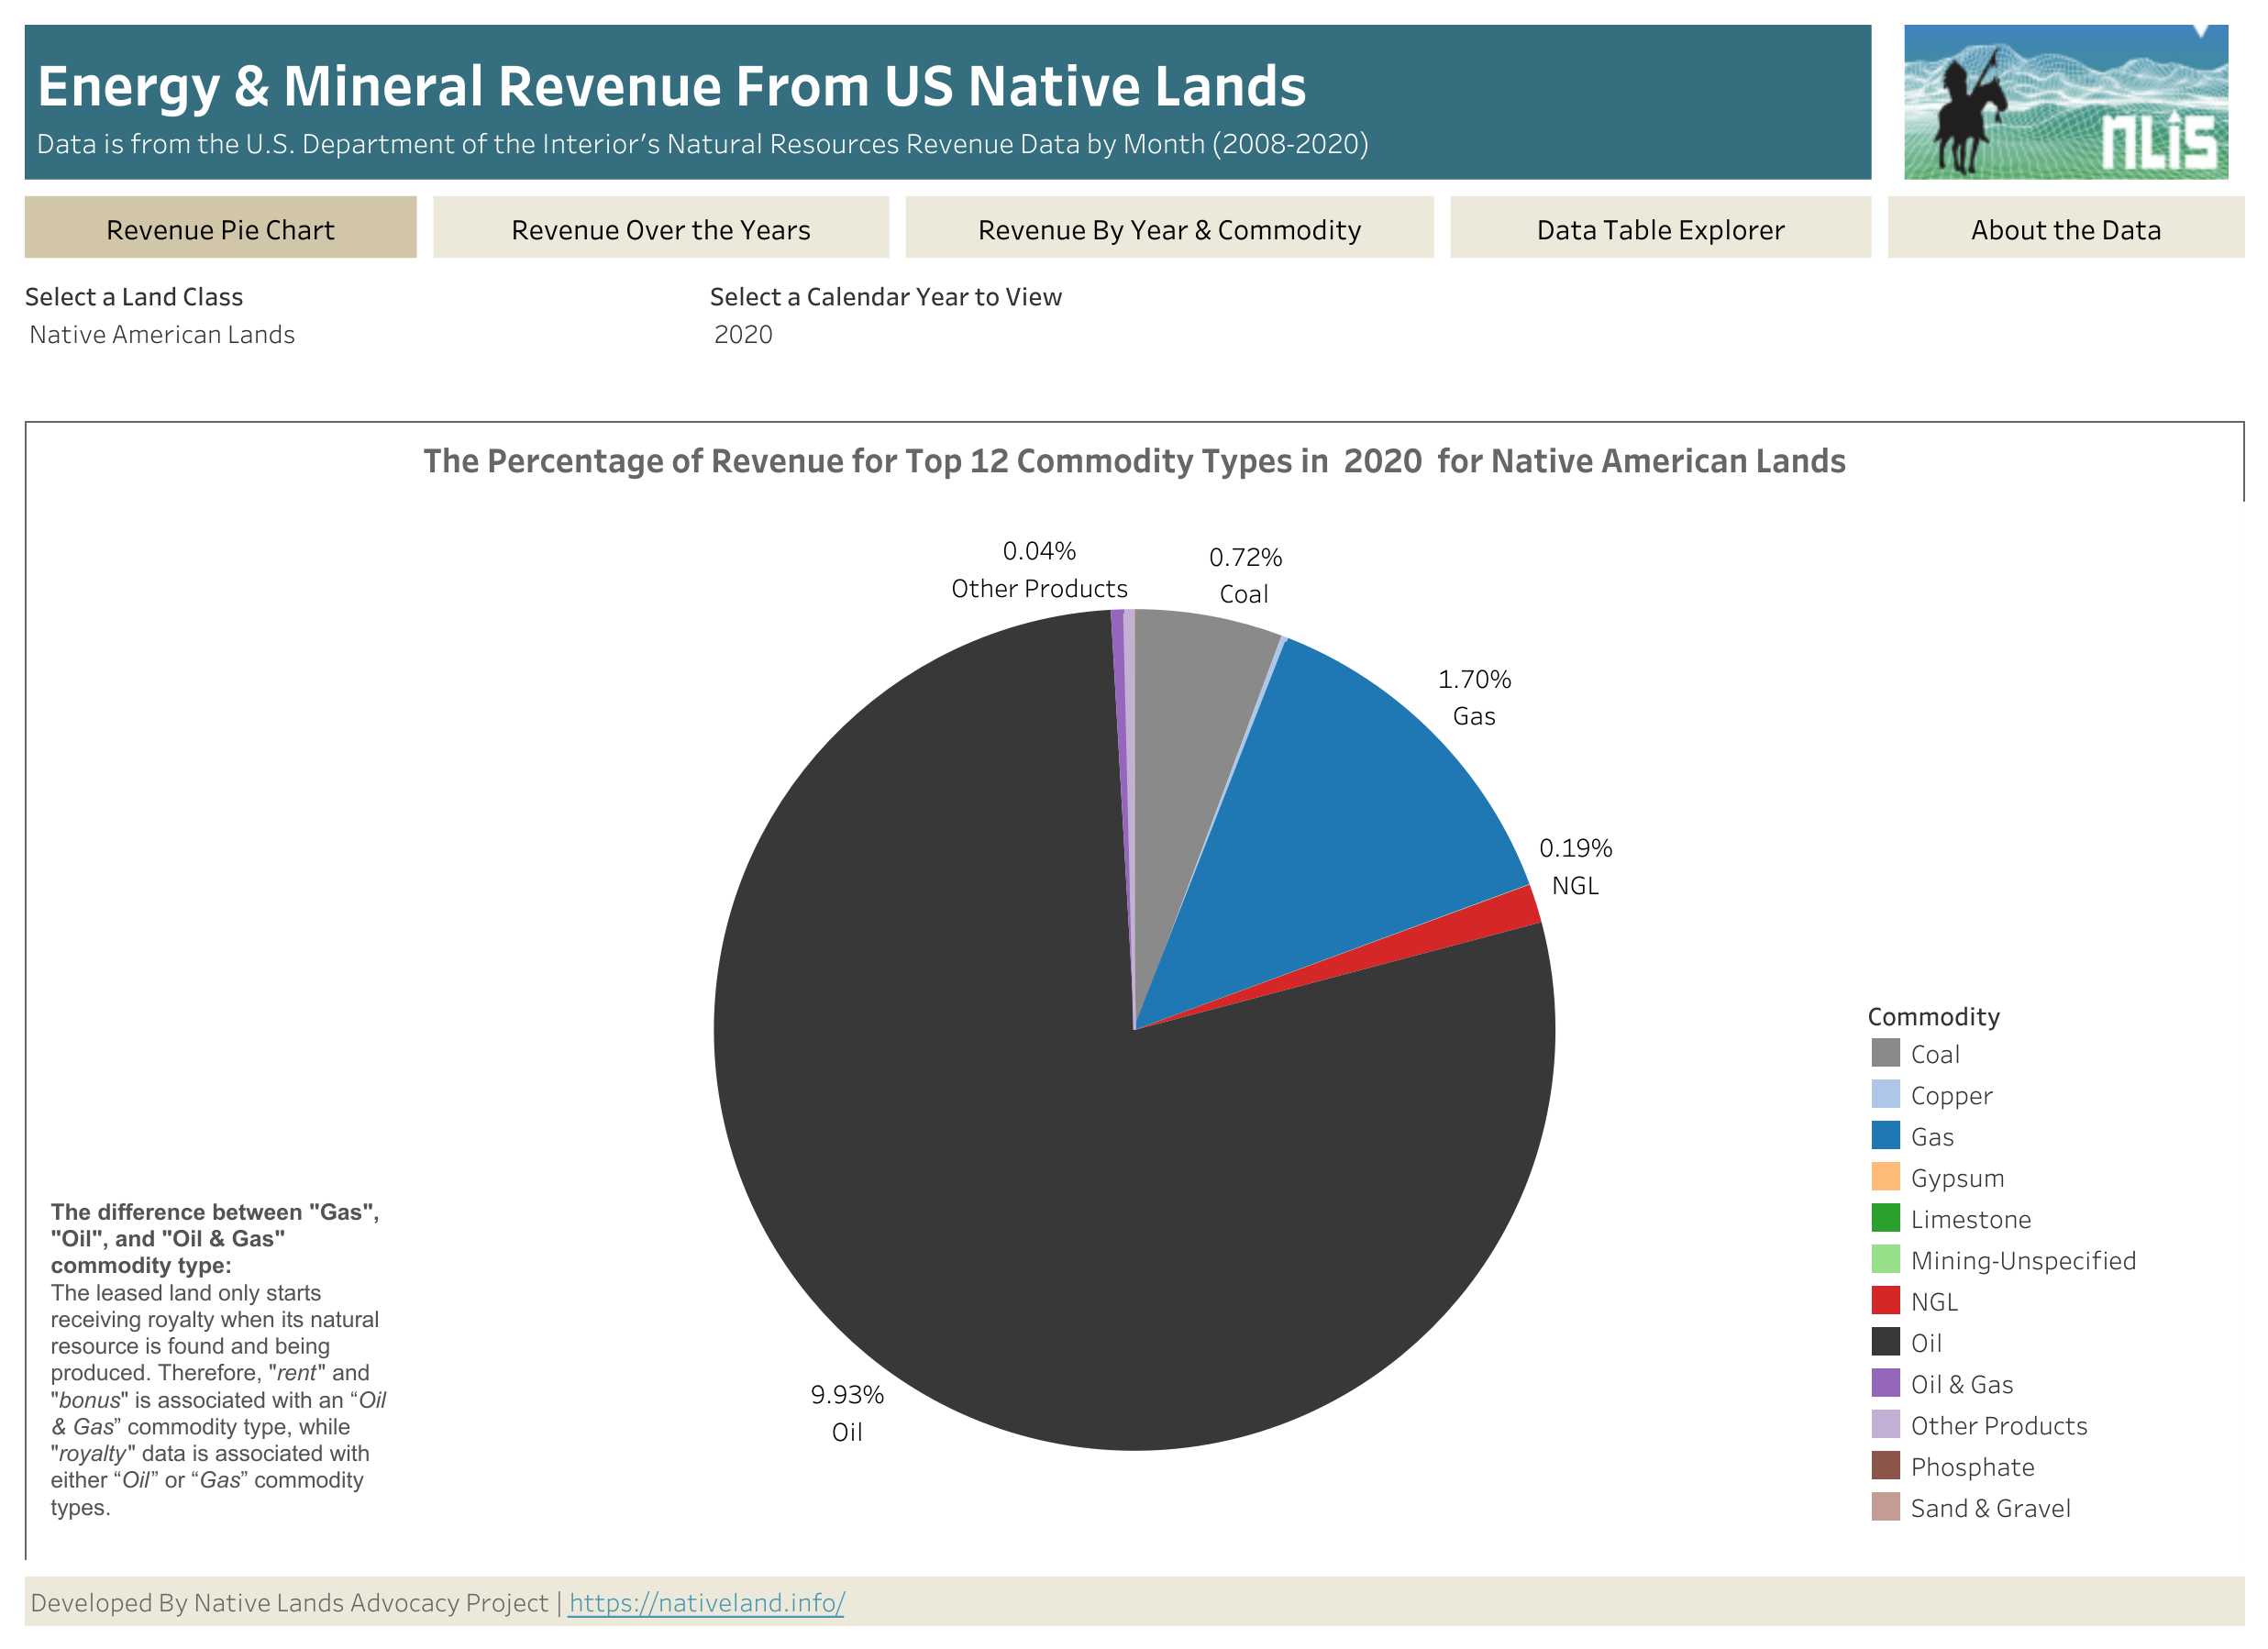 Energy & Mineral Revenue From US Native Lands (2008-2020)